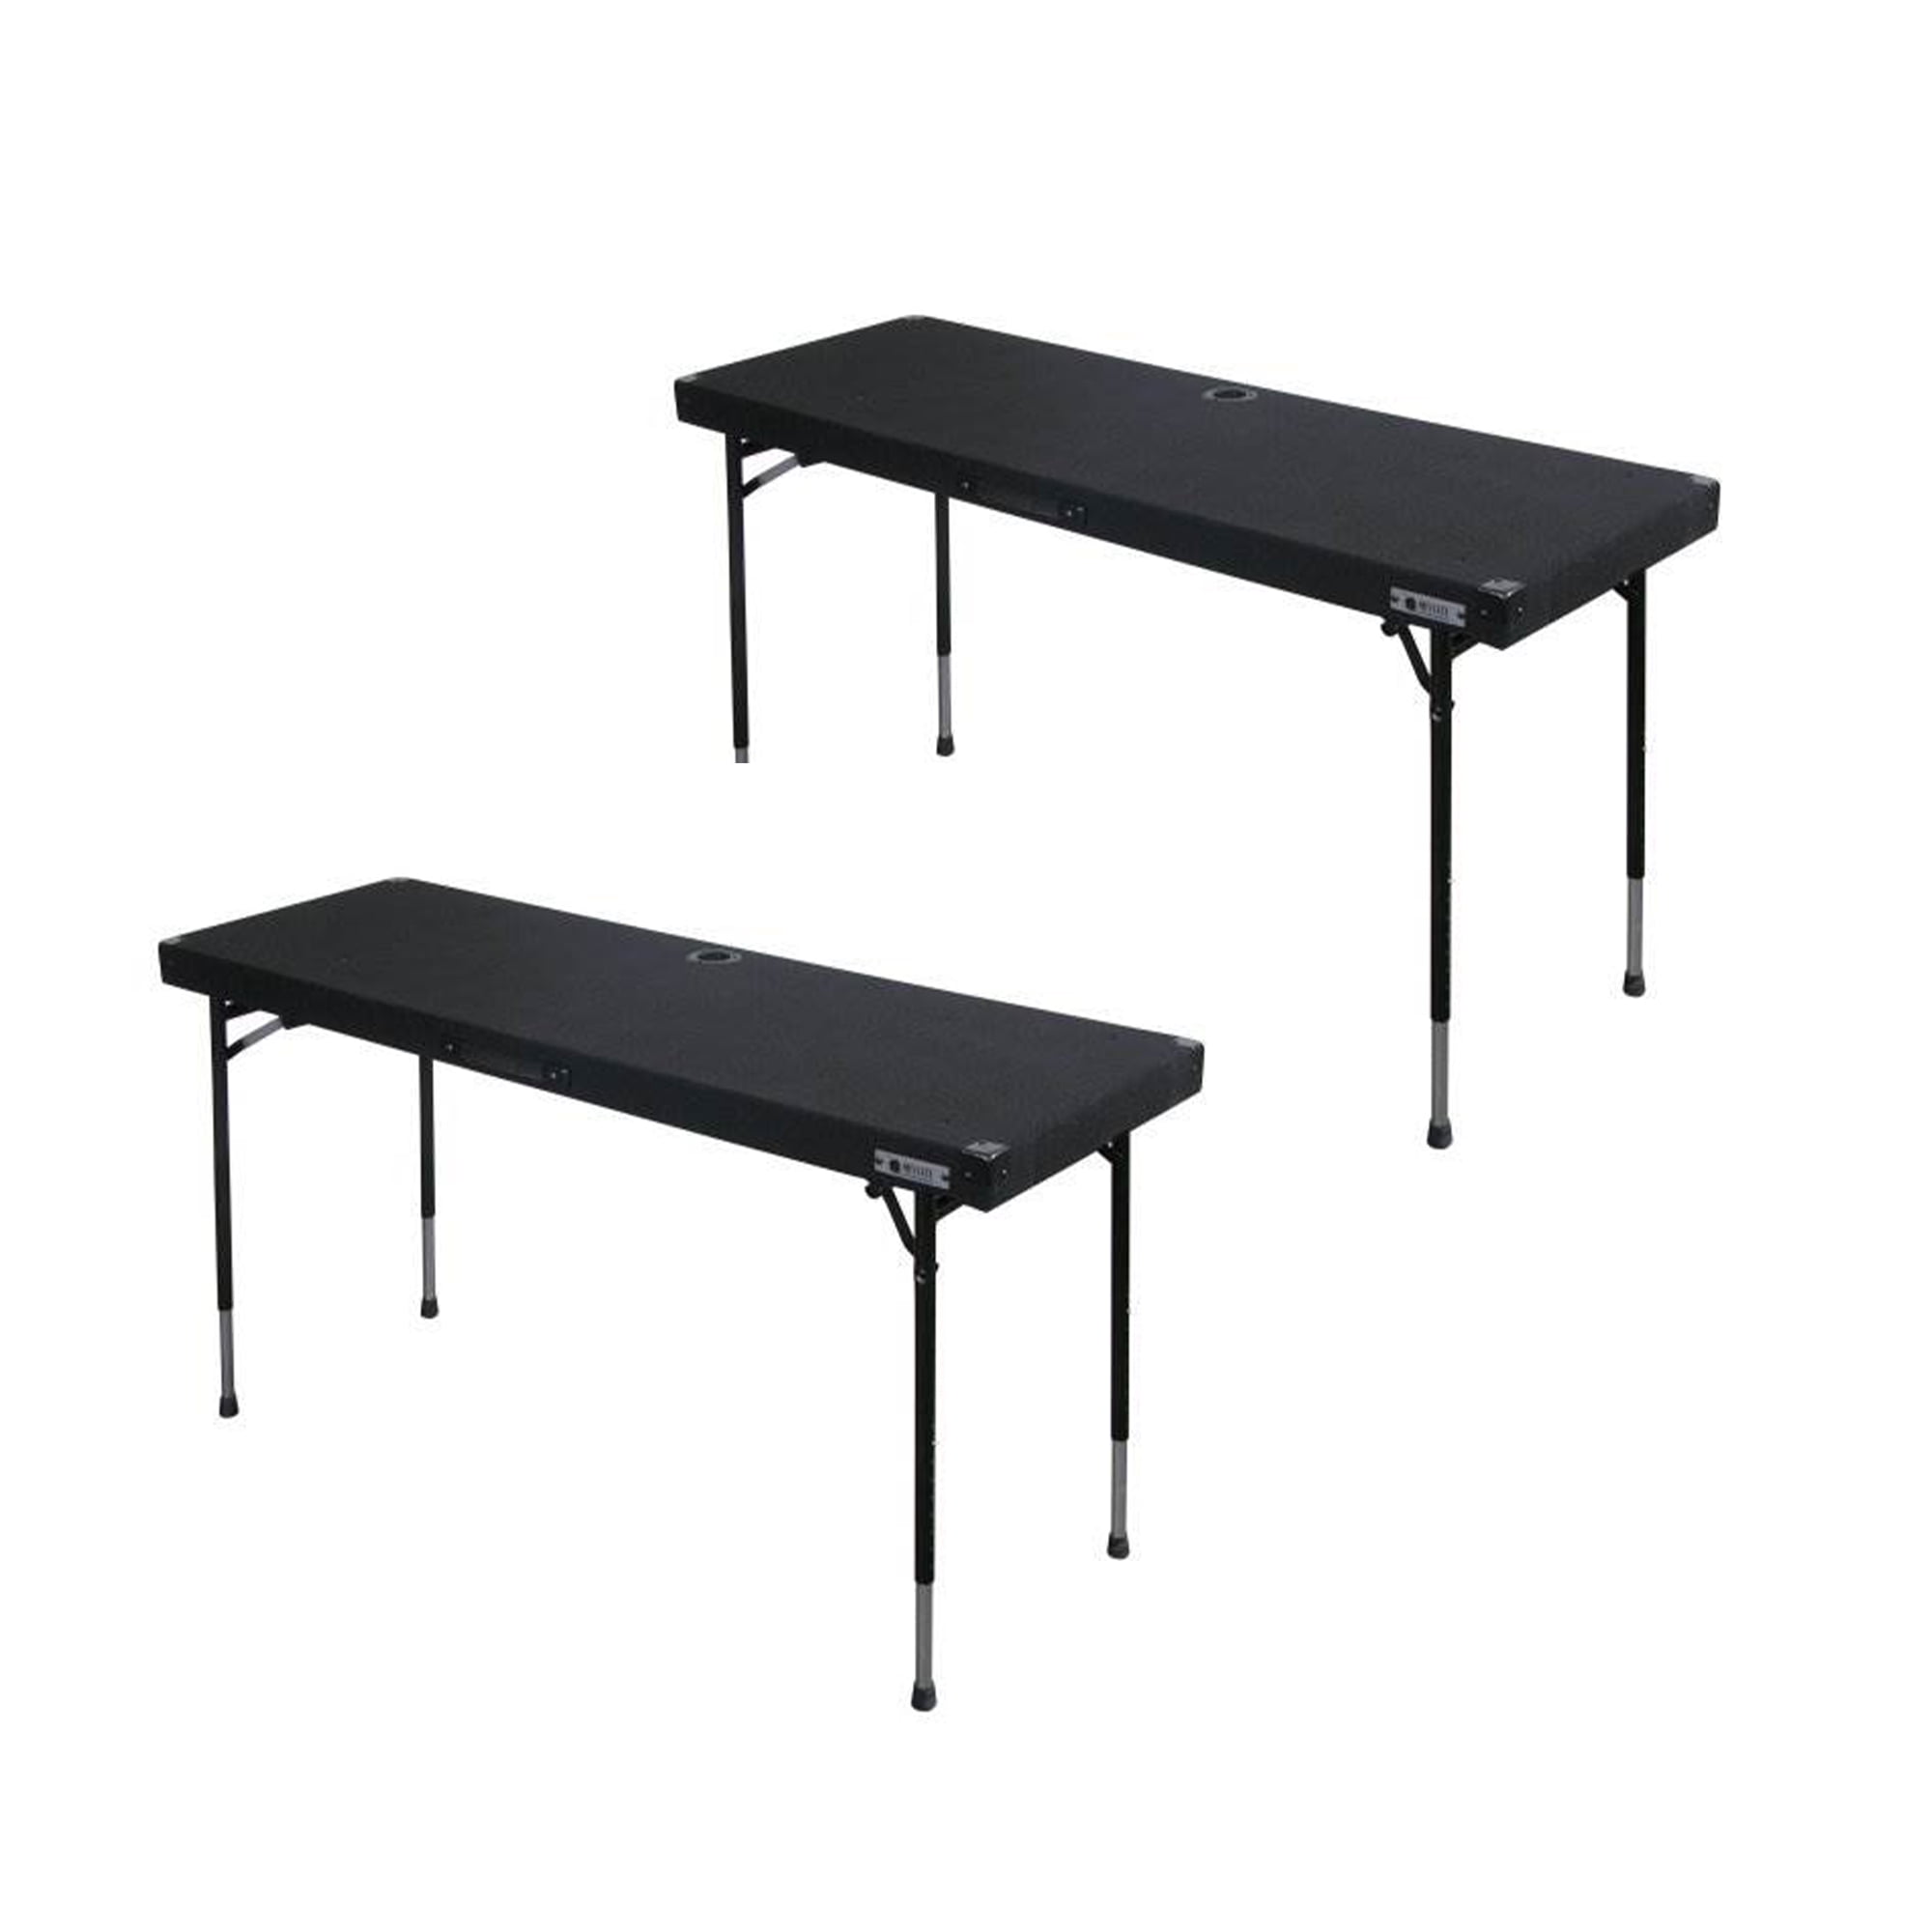 Odyssey CTBC2060 Carpeted Folding Dj Table With Adjustable Leg System 